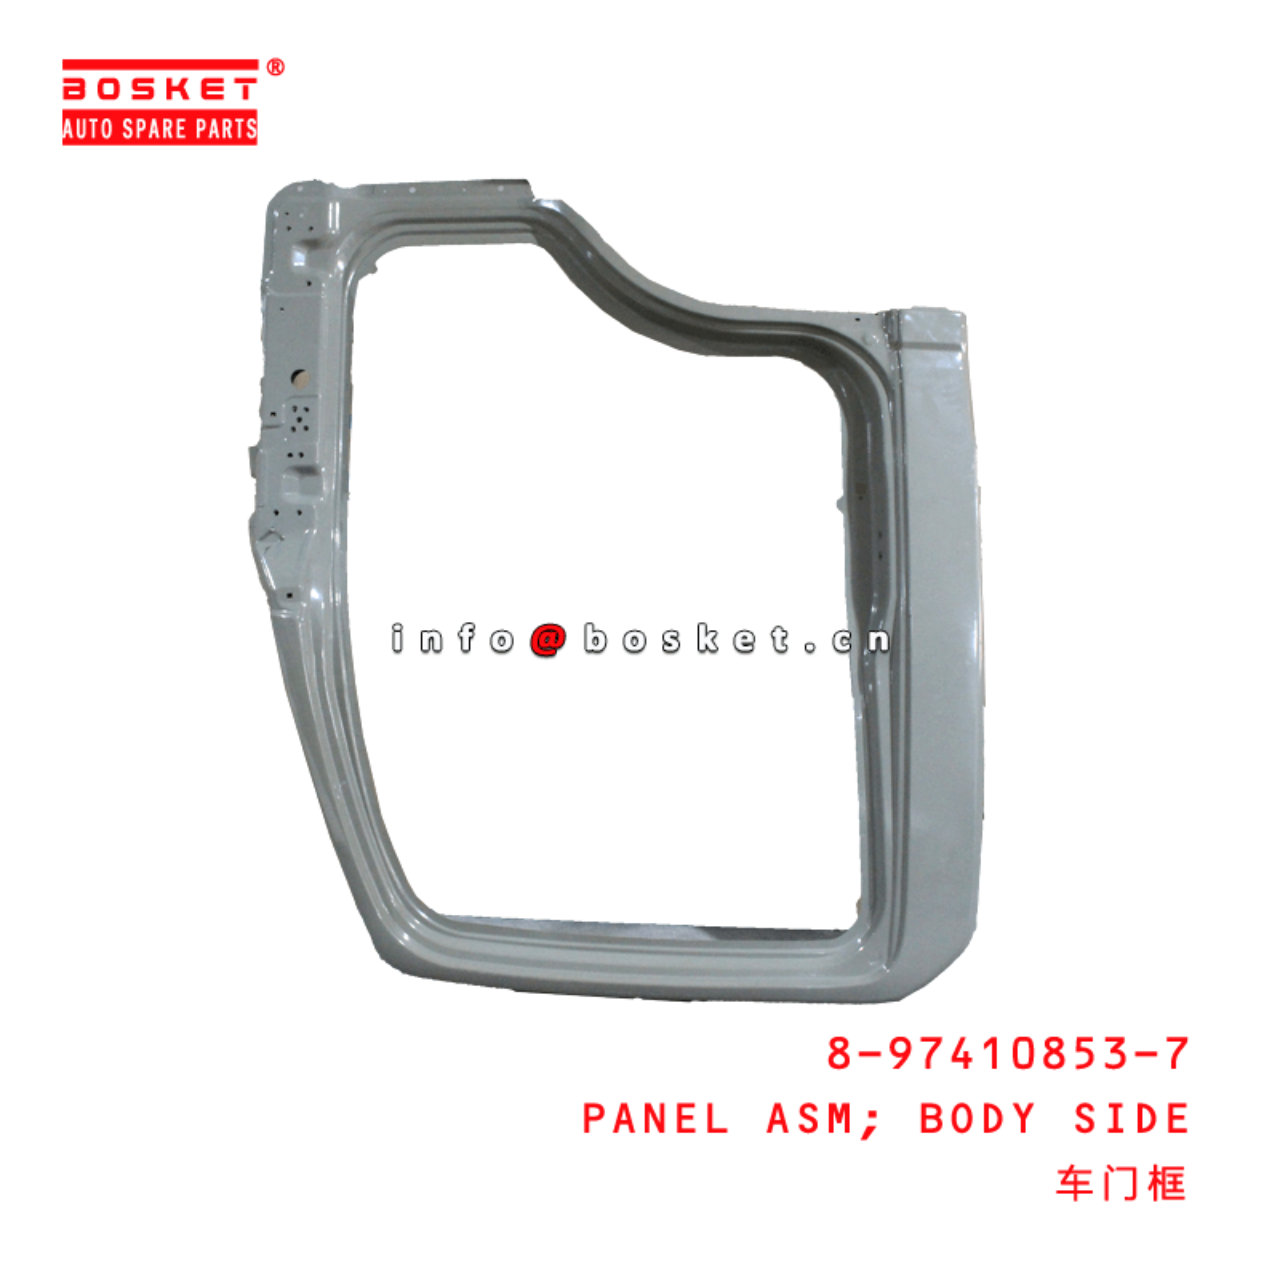  8-97410853-7 Body Side Panel Assembly 8974108537 Suitable for ISUZU NPR75 